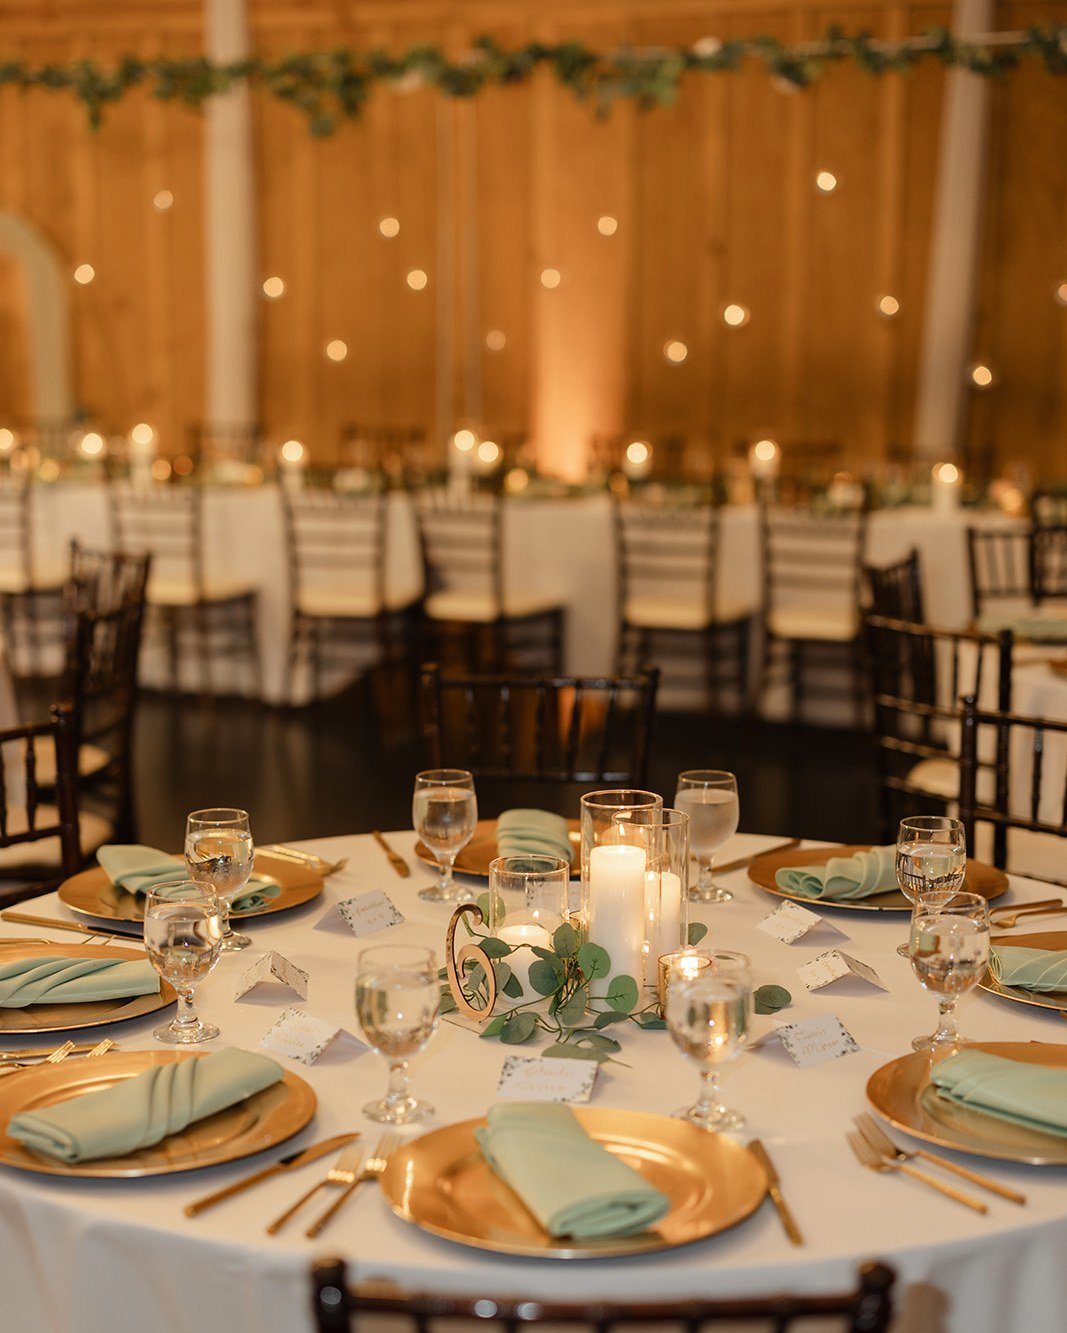 An elegant and timeline wedding reception! The combination of white, gold and green is perfect for this springtime wedding, but these colors can be used year-round!

@brookeimages
@coastalcoordinating
@biscottisjax

#weddingdetails #weddingday #bowin